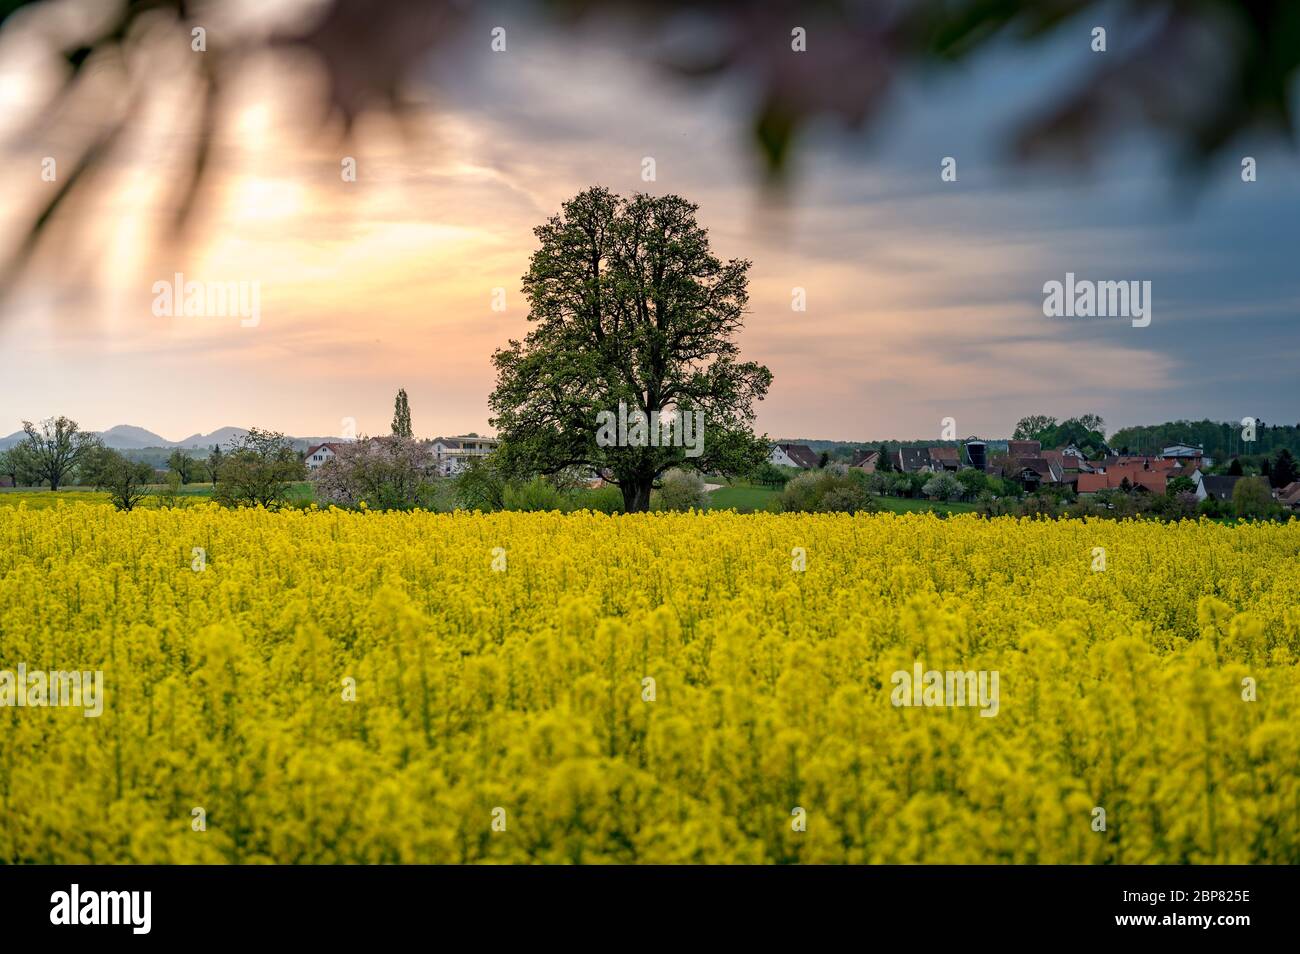 Beautiful spring landscape with a giant pear tree and a blooming rapefield Stock Photo